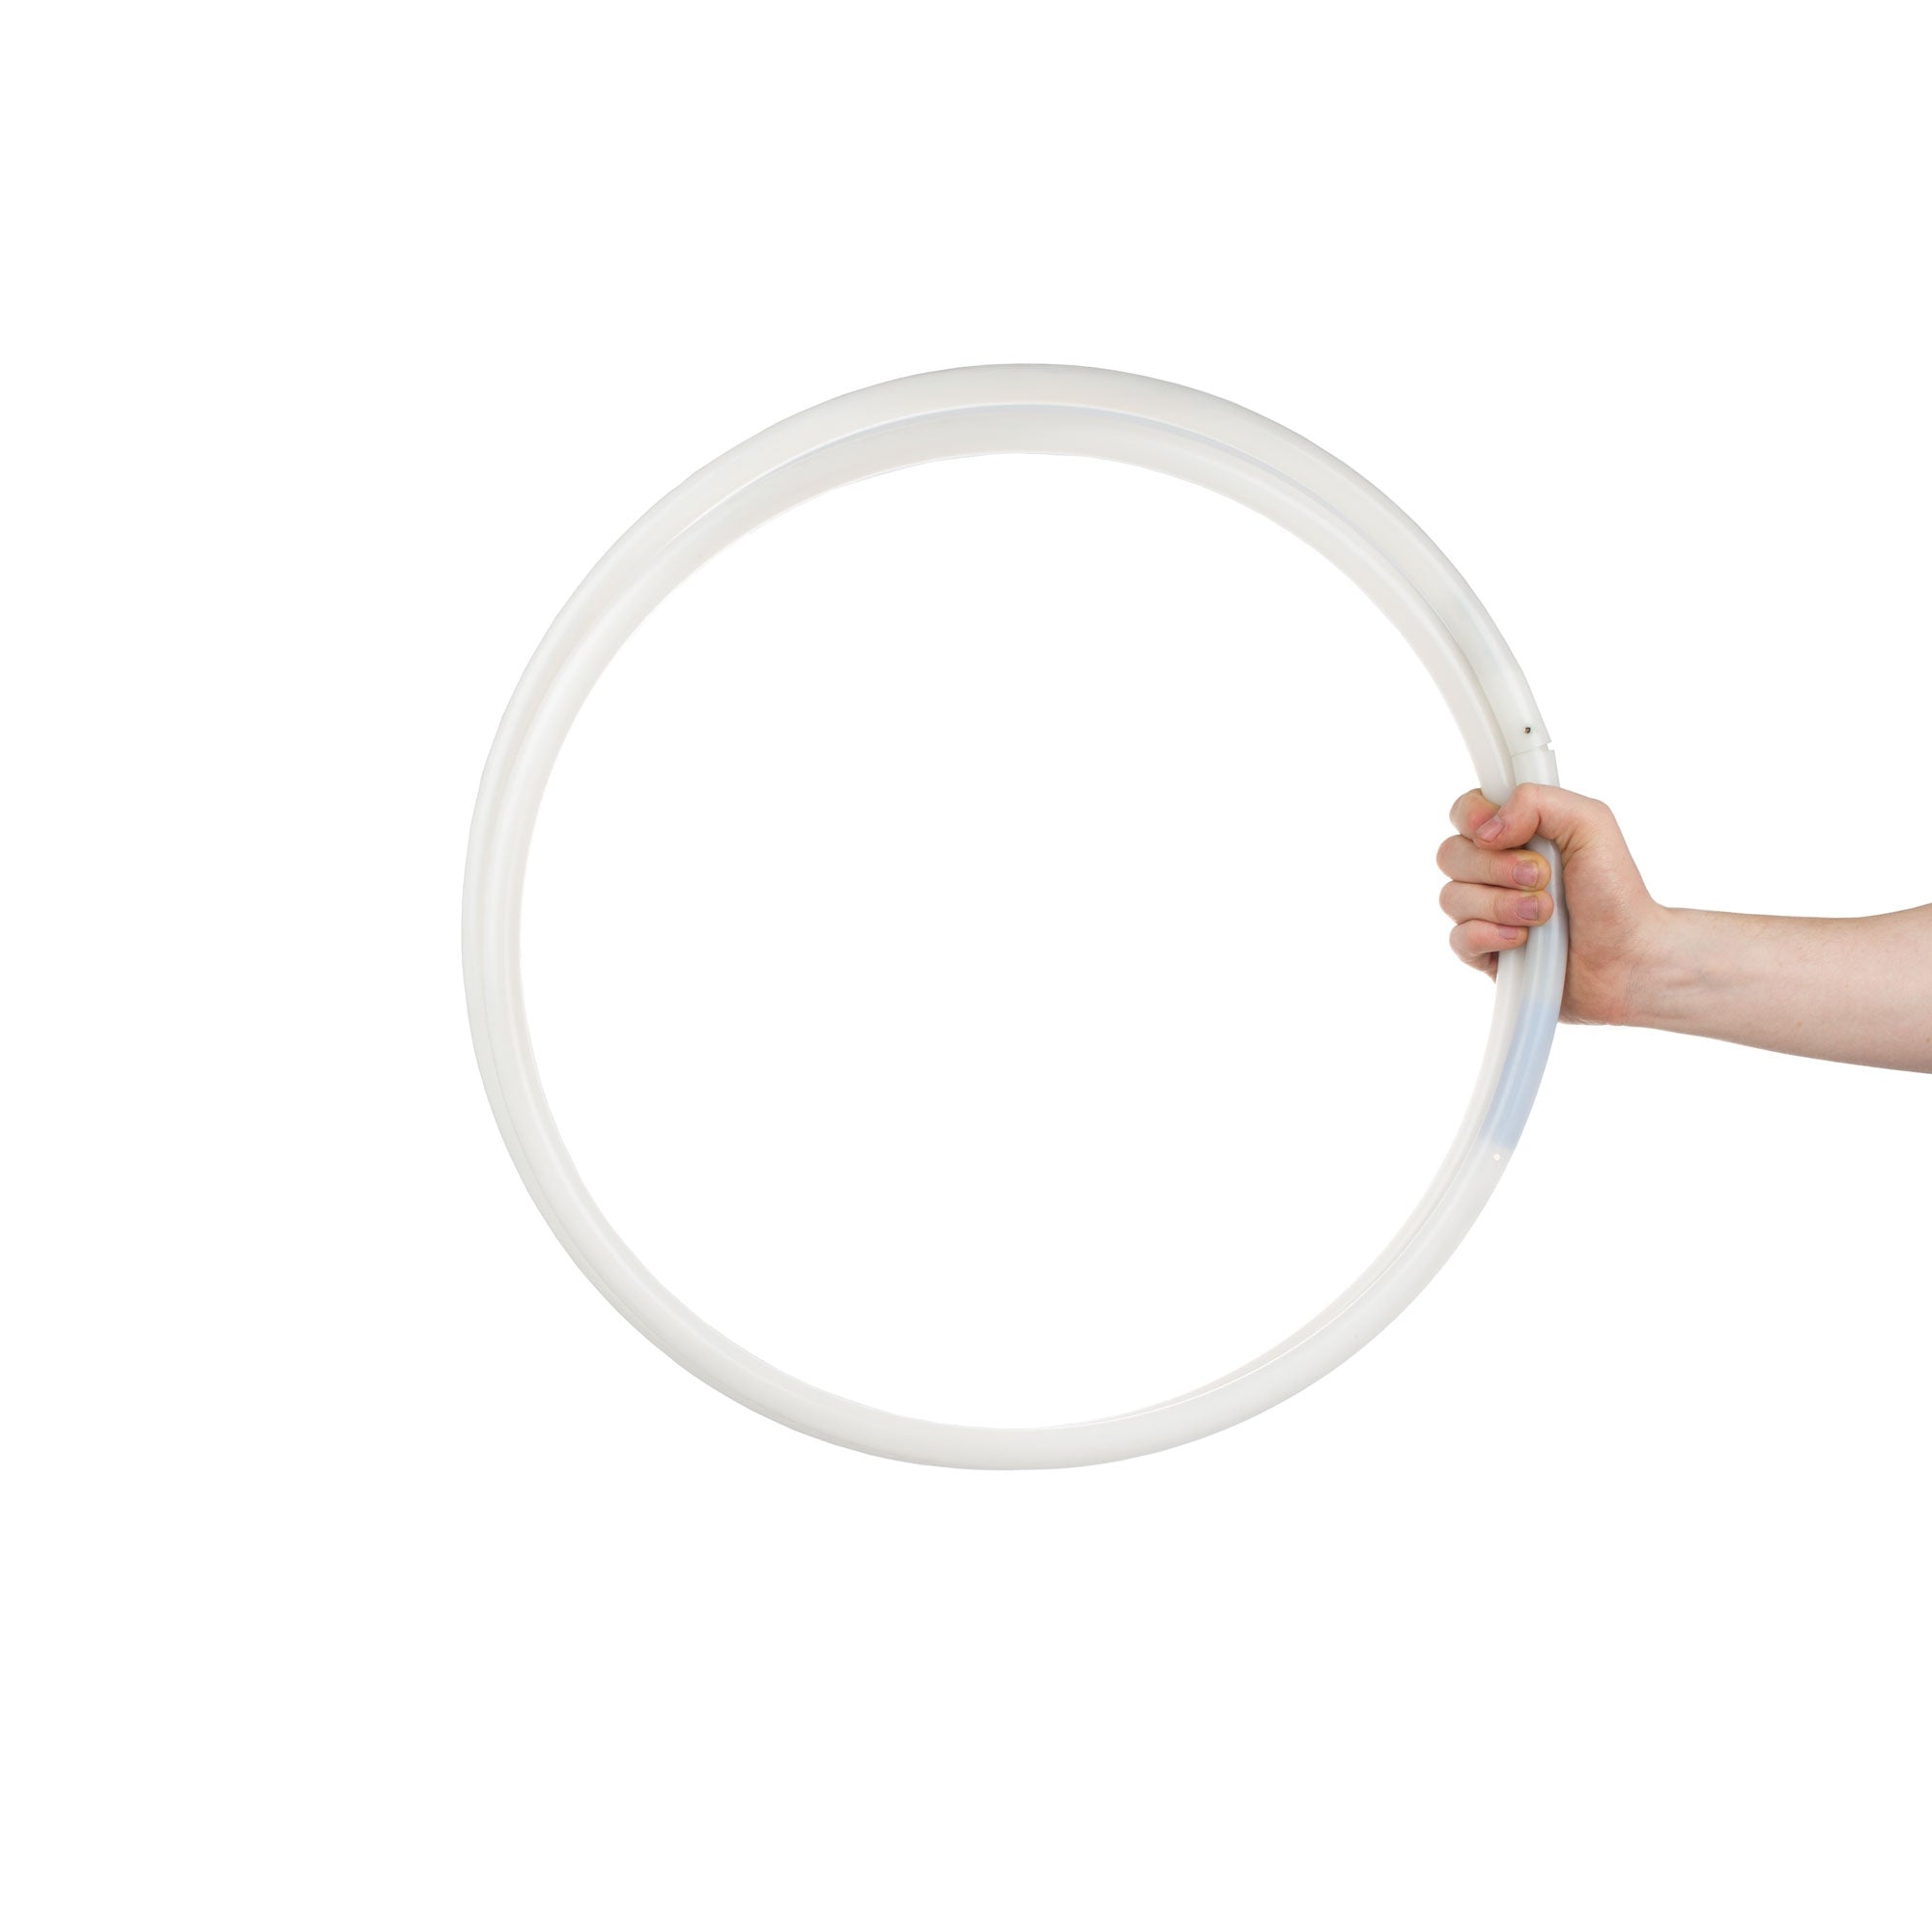 Hoop collapsed and held in hand